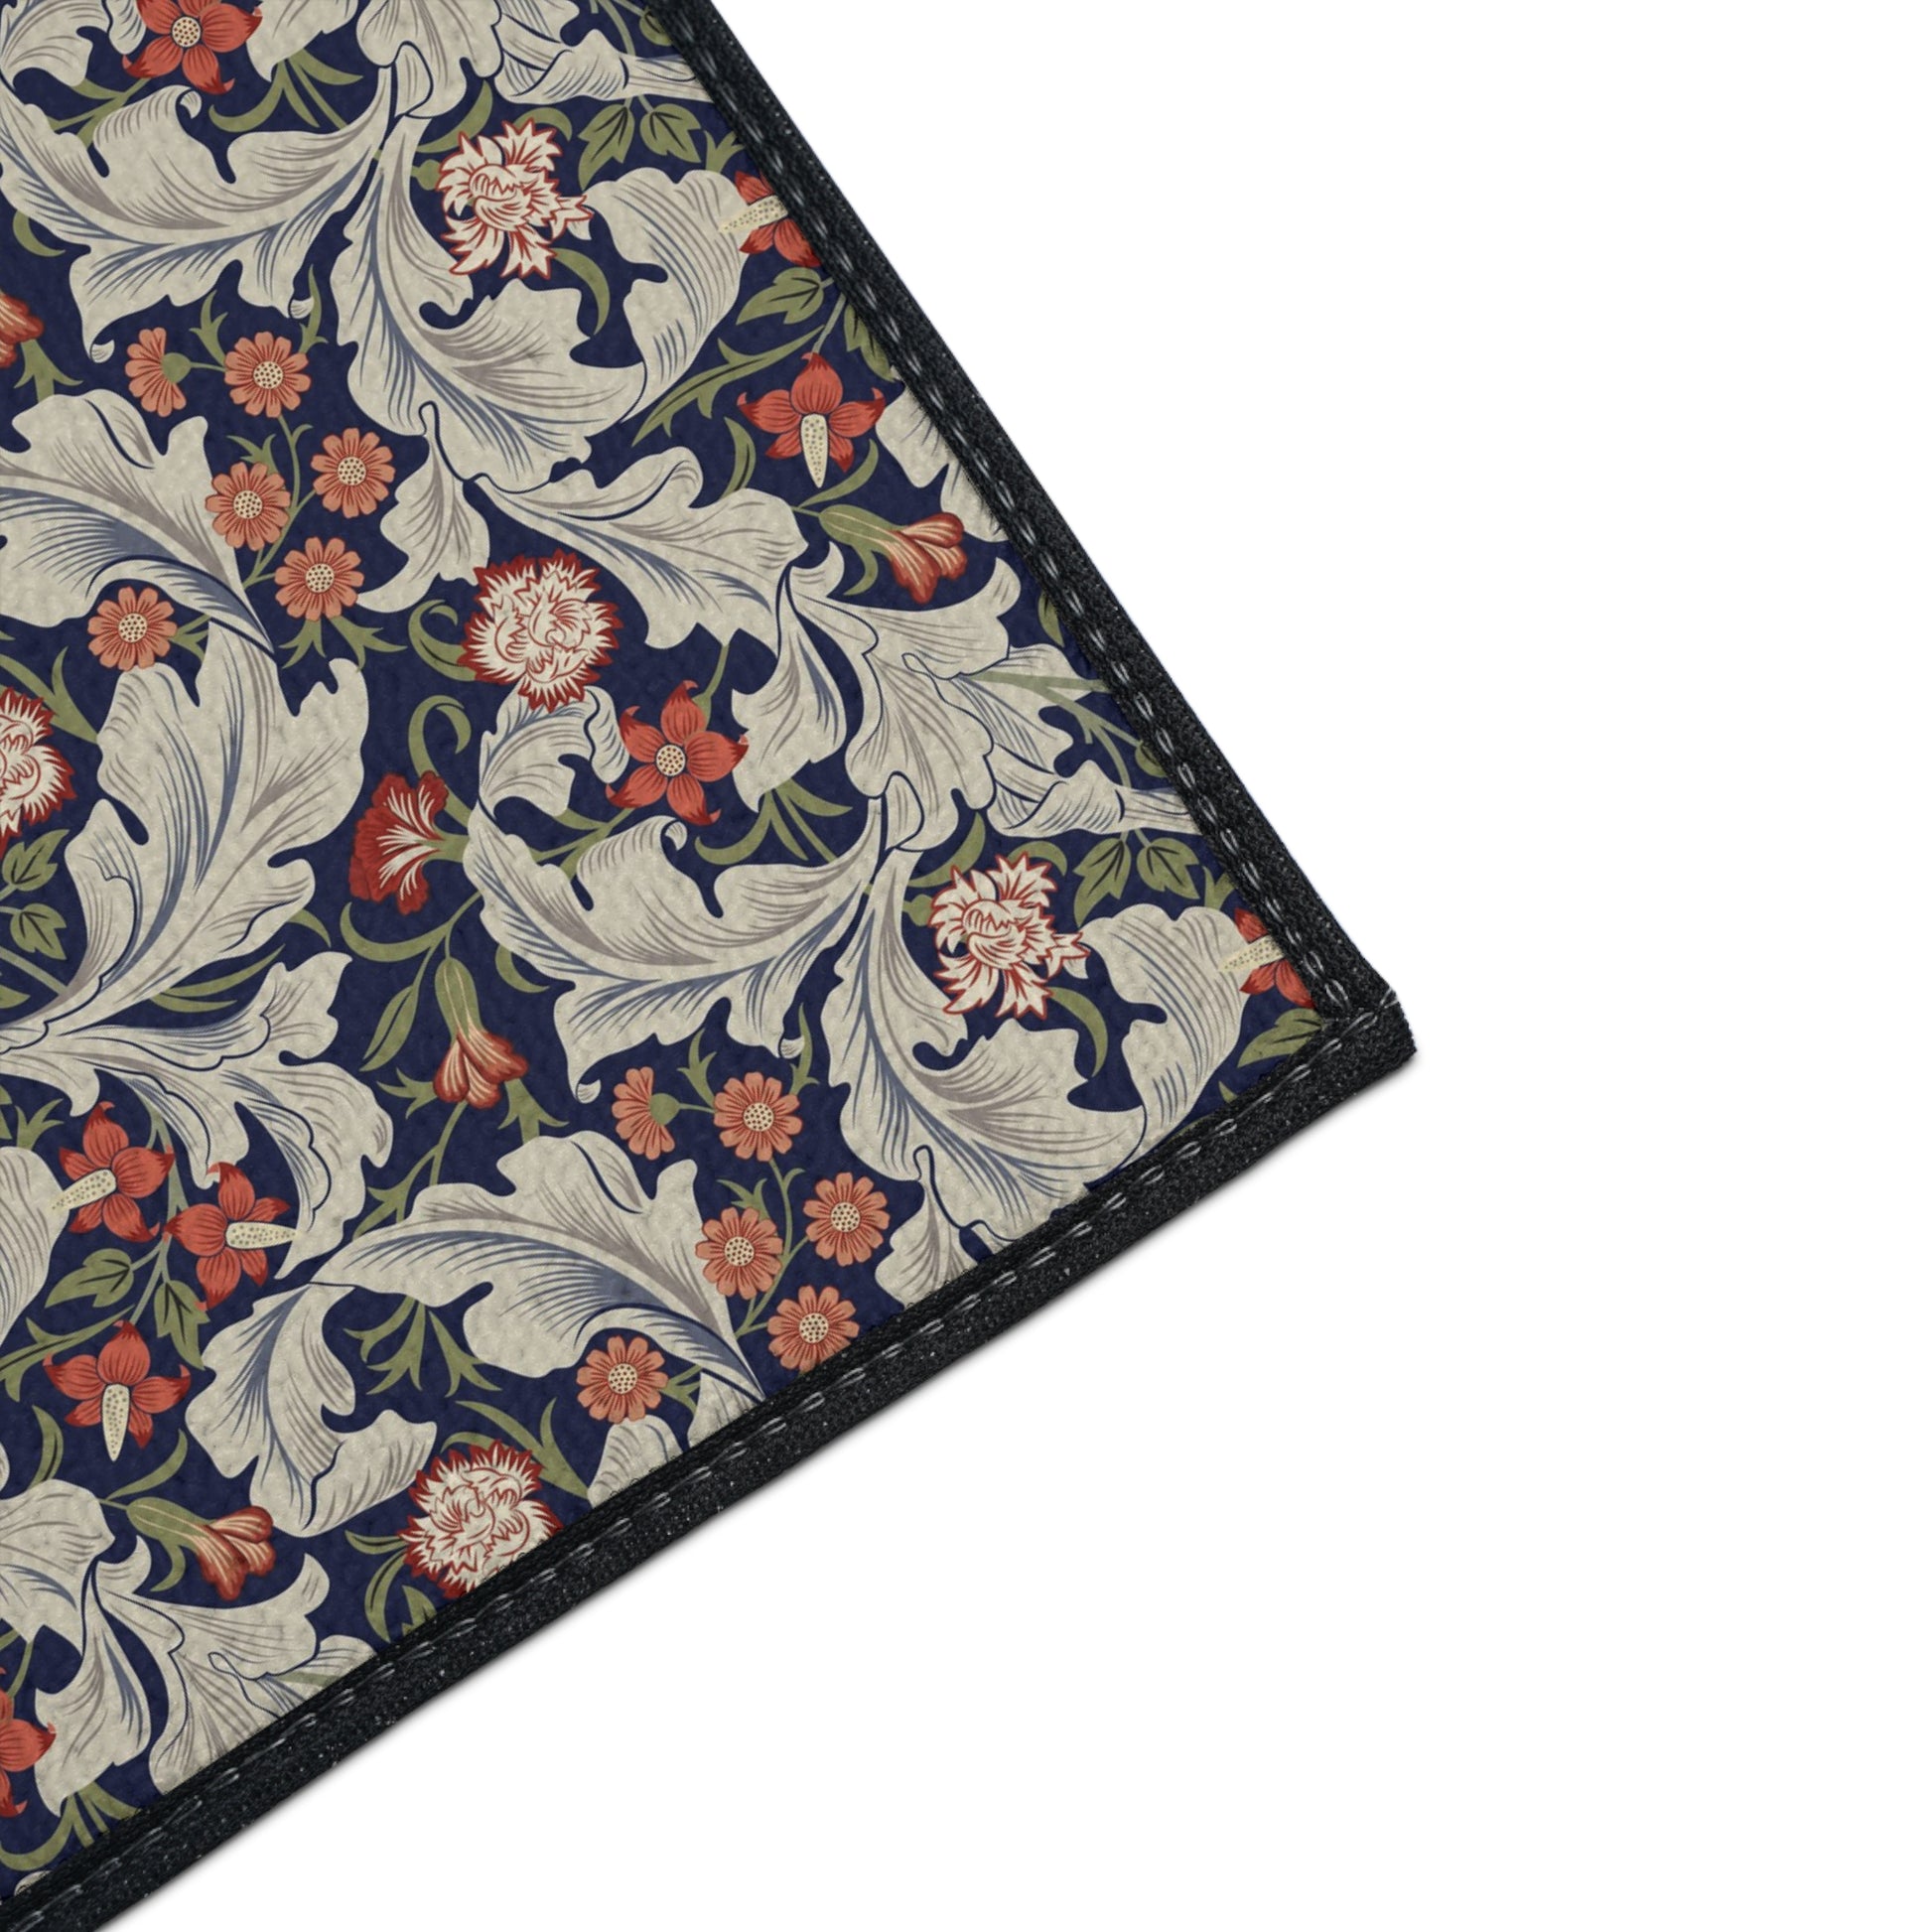 william-morris-co-heavy-duty-floor-mat-leicester-collection-royal-14